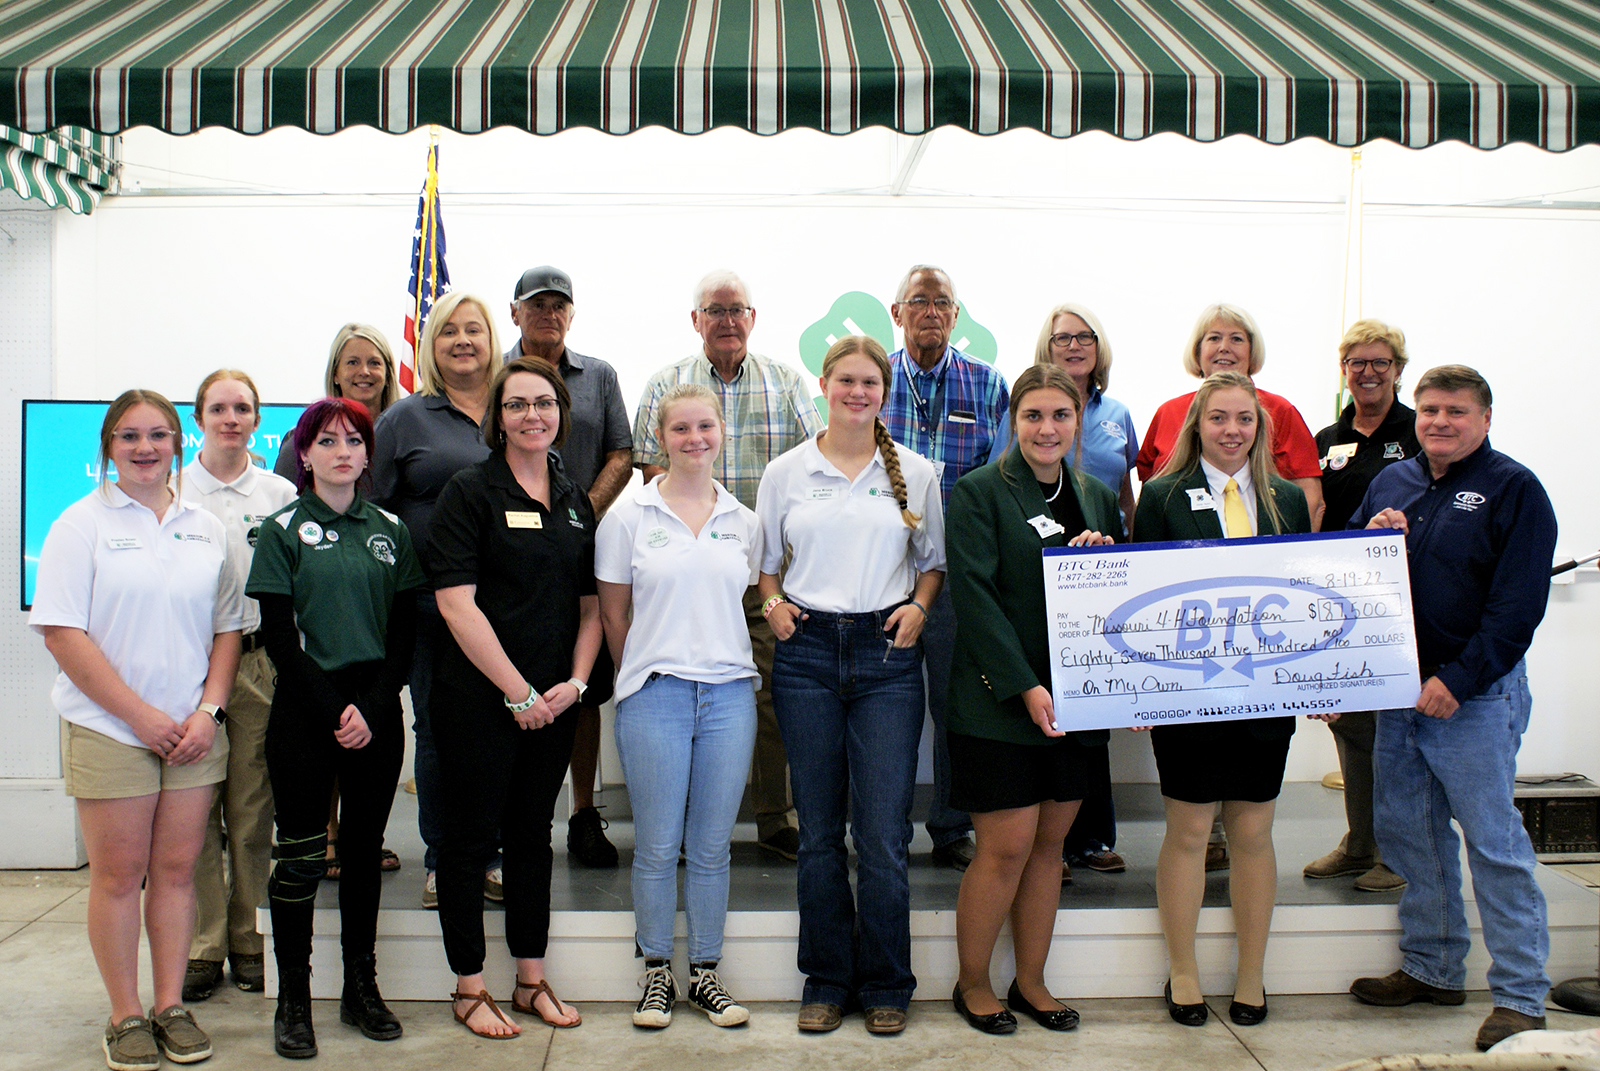 Open BTC Bank has made a five-year pledge of support to the Missouri 4-H Foundation for a youth financial education program called On My Own. BTC Bank President and CEO Doug Fish, front row, far right, presented a check to Missouri 4-H representatives Aug. 18 